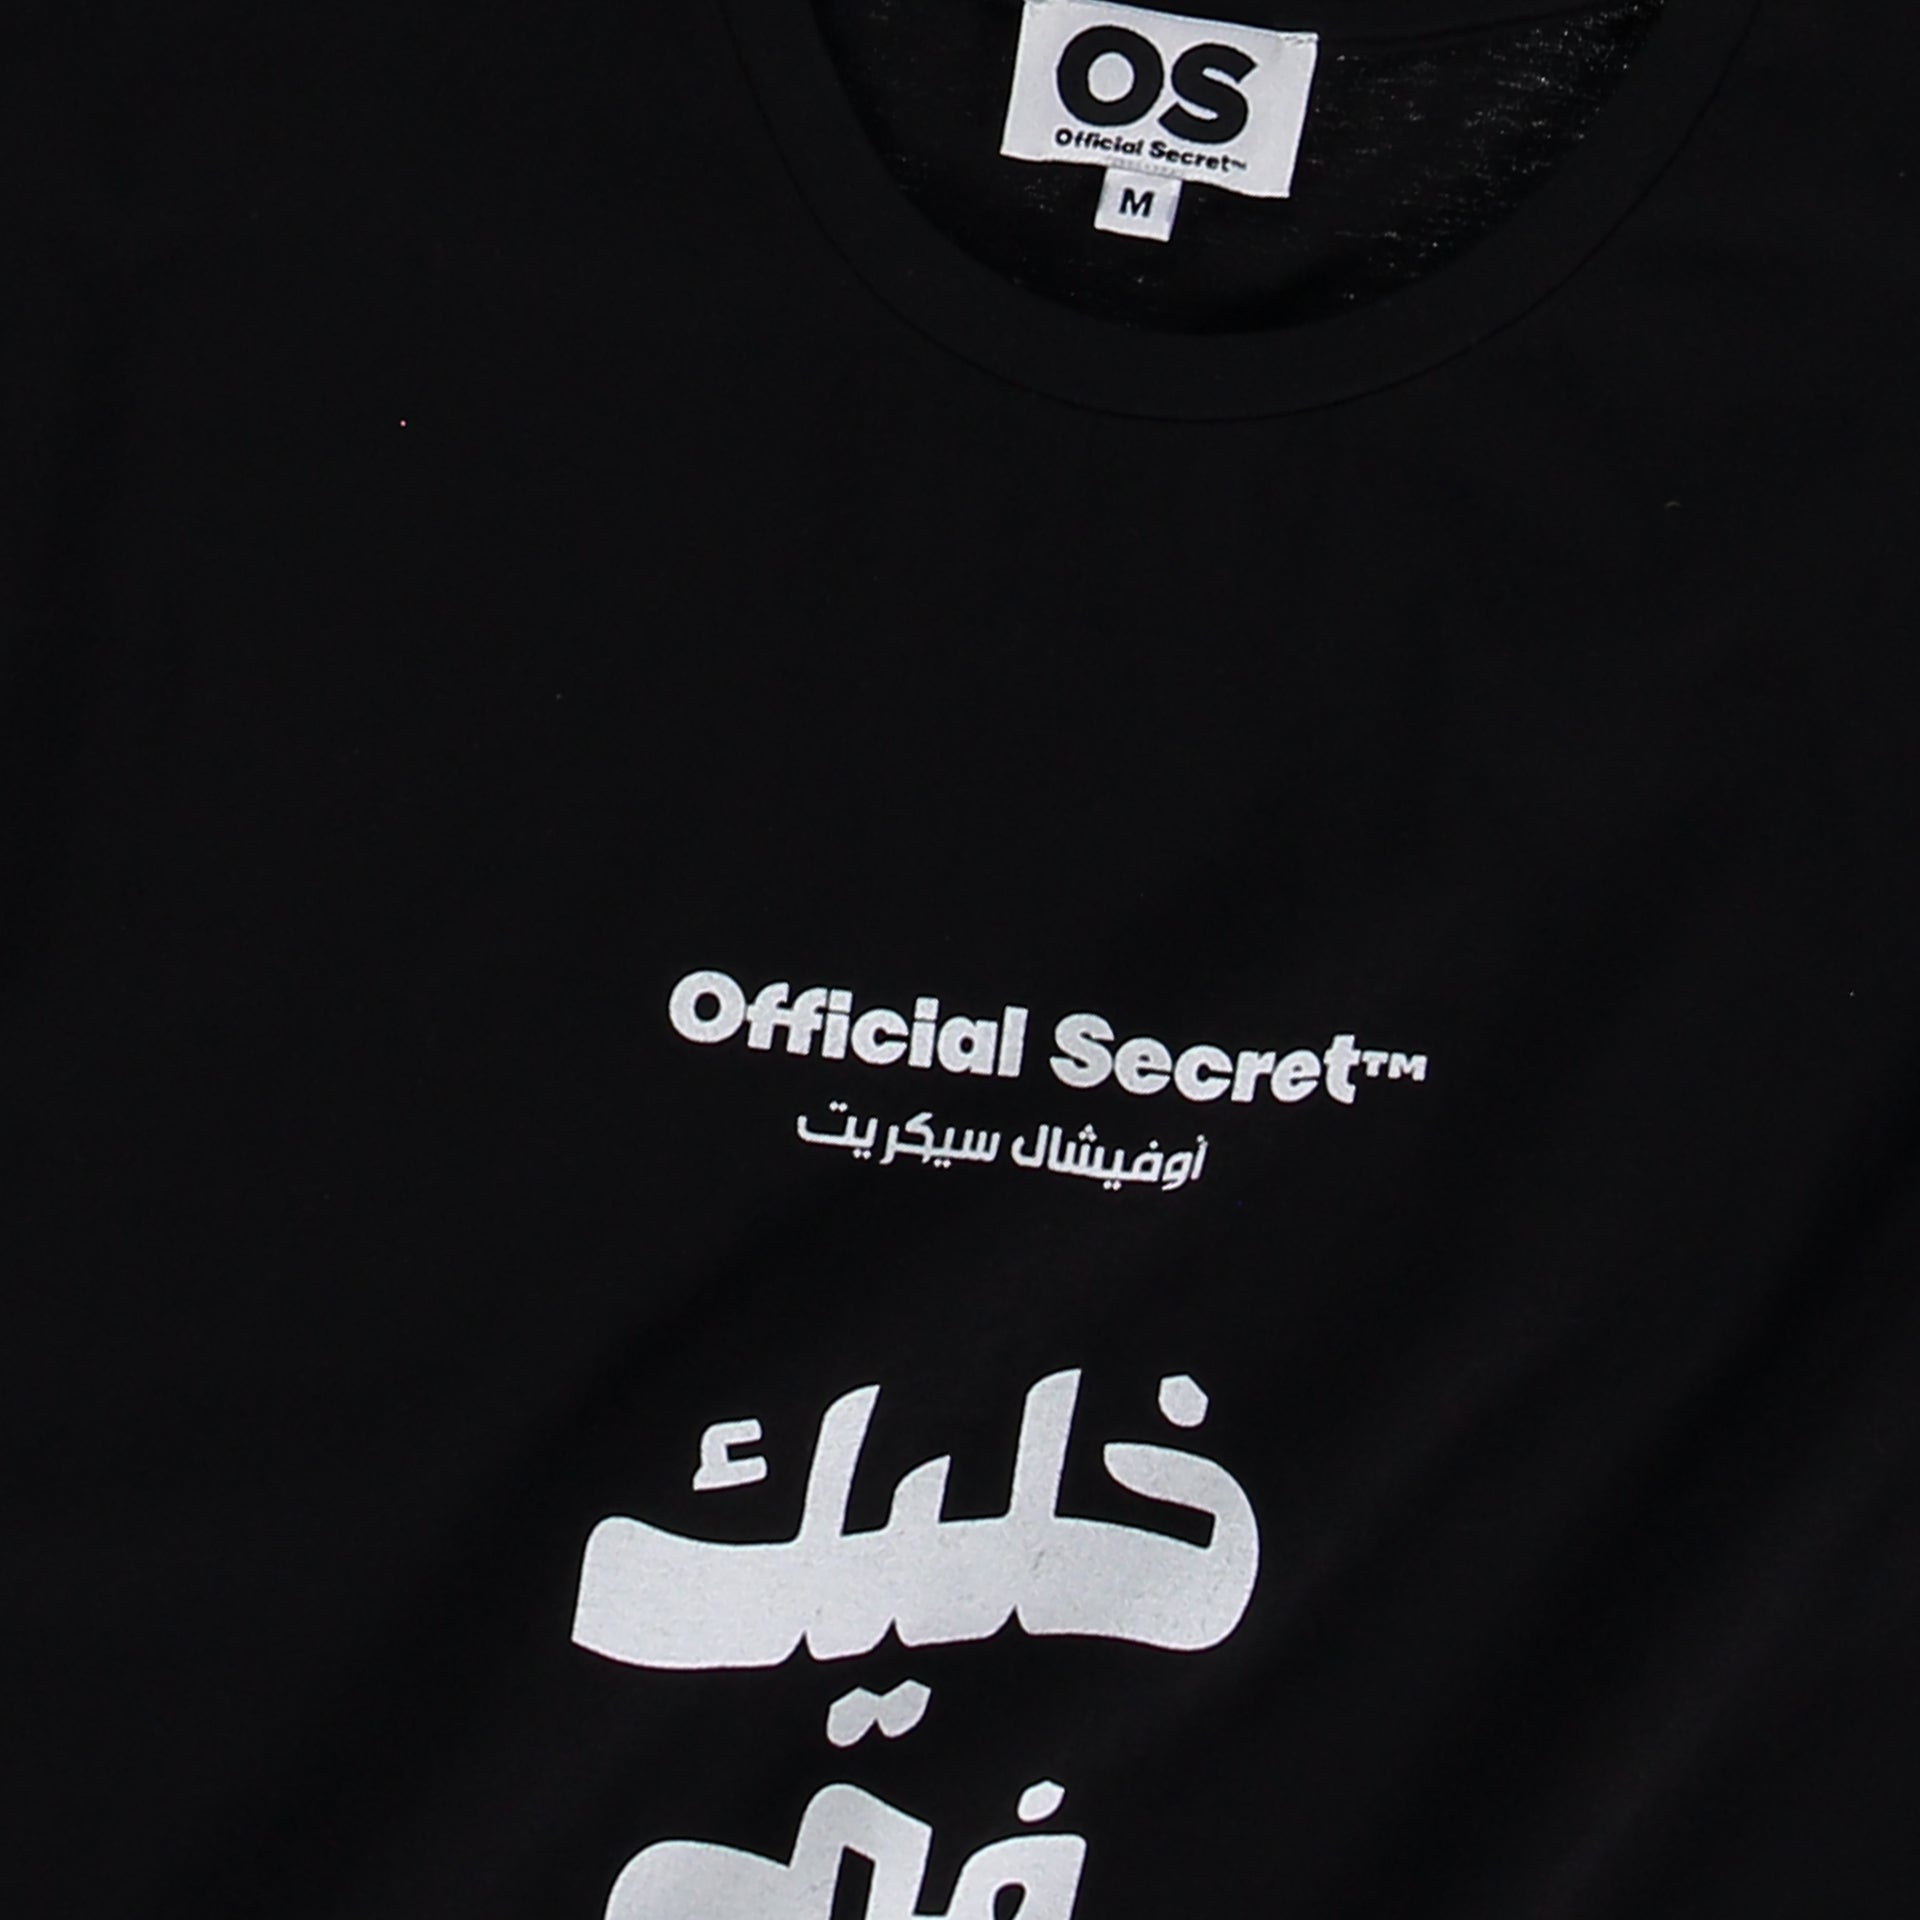 Black Stay Away Cotton T-Shirt From Official Secret